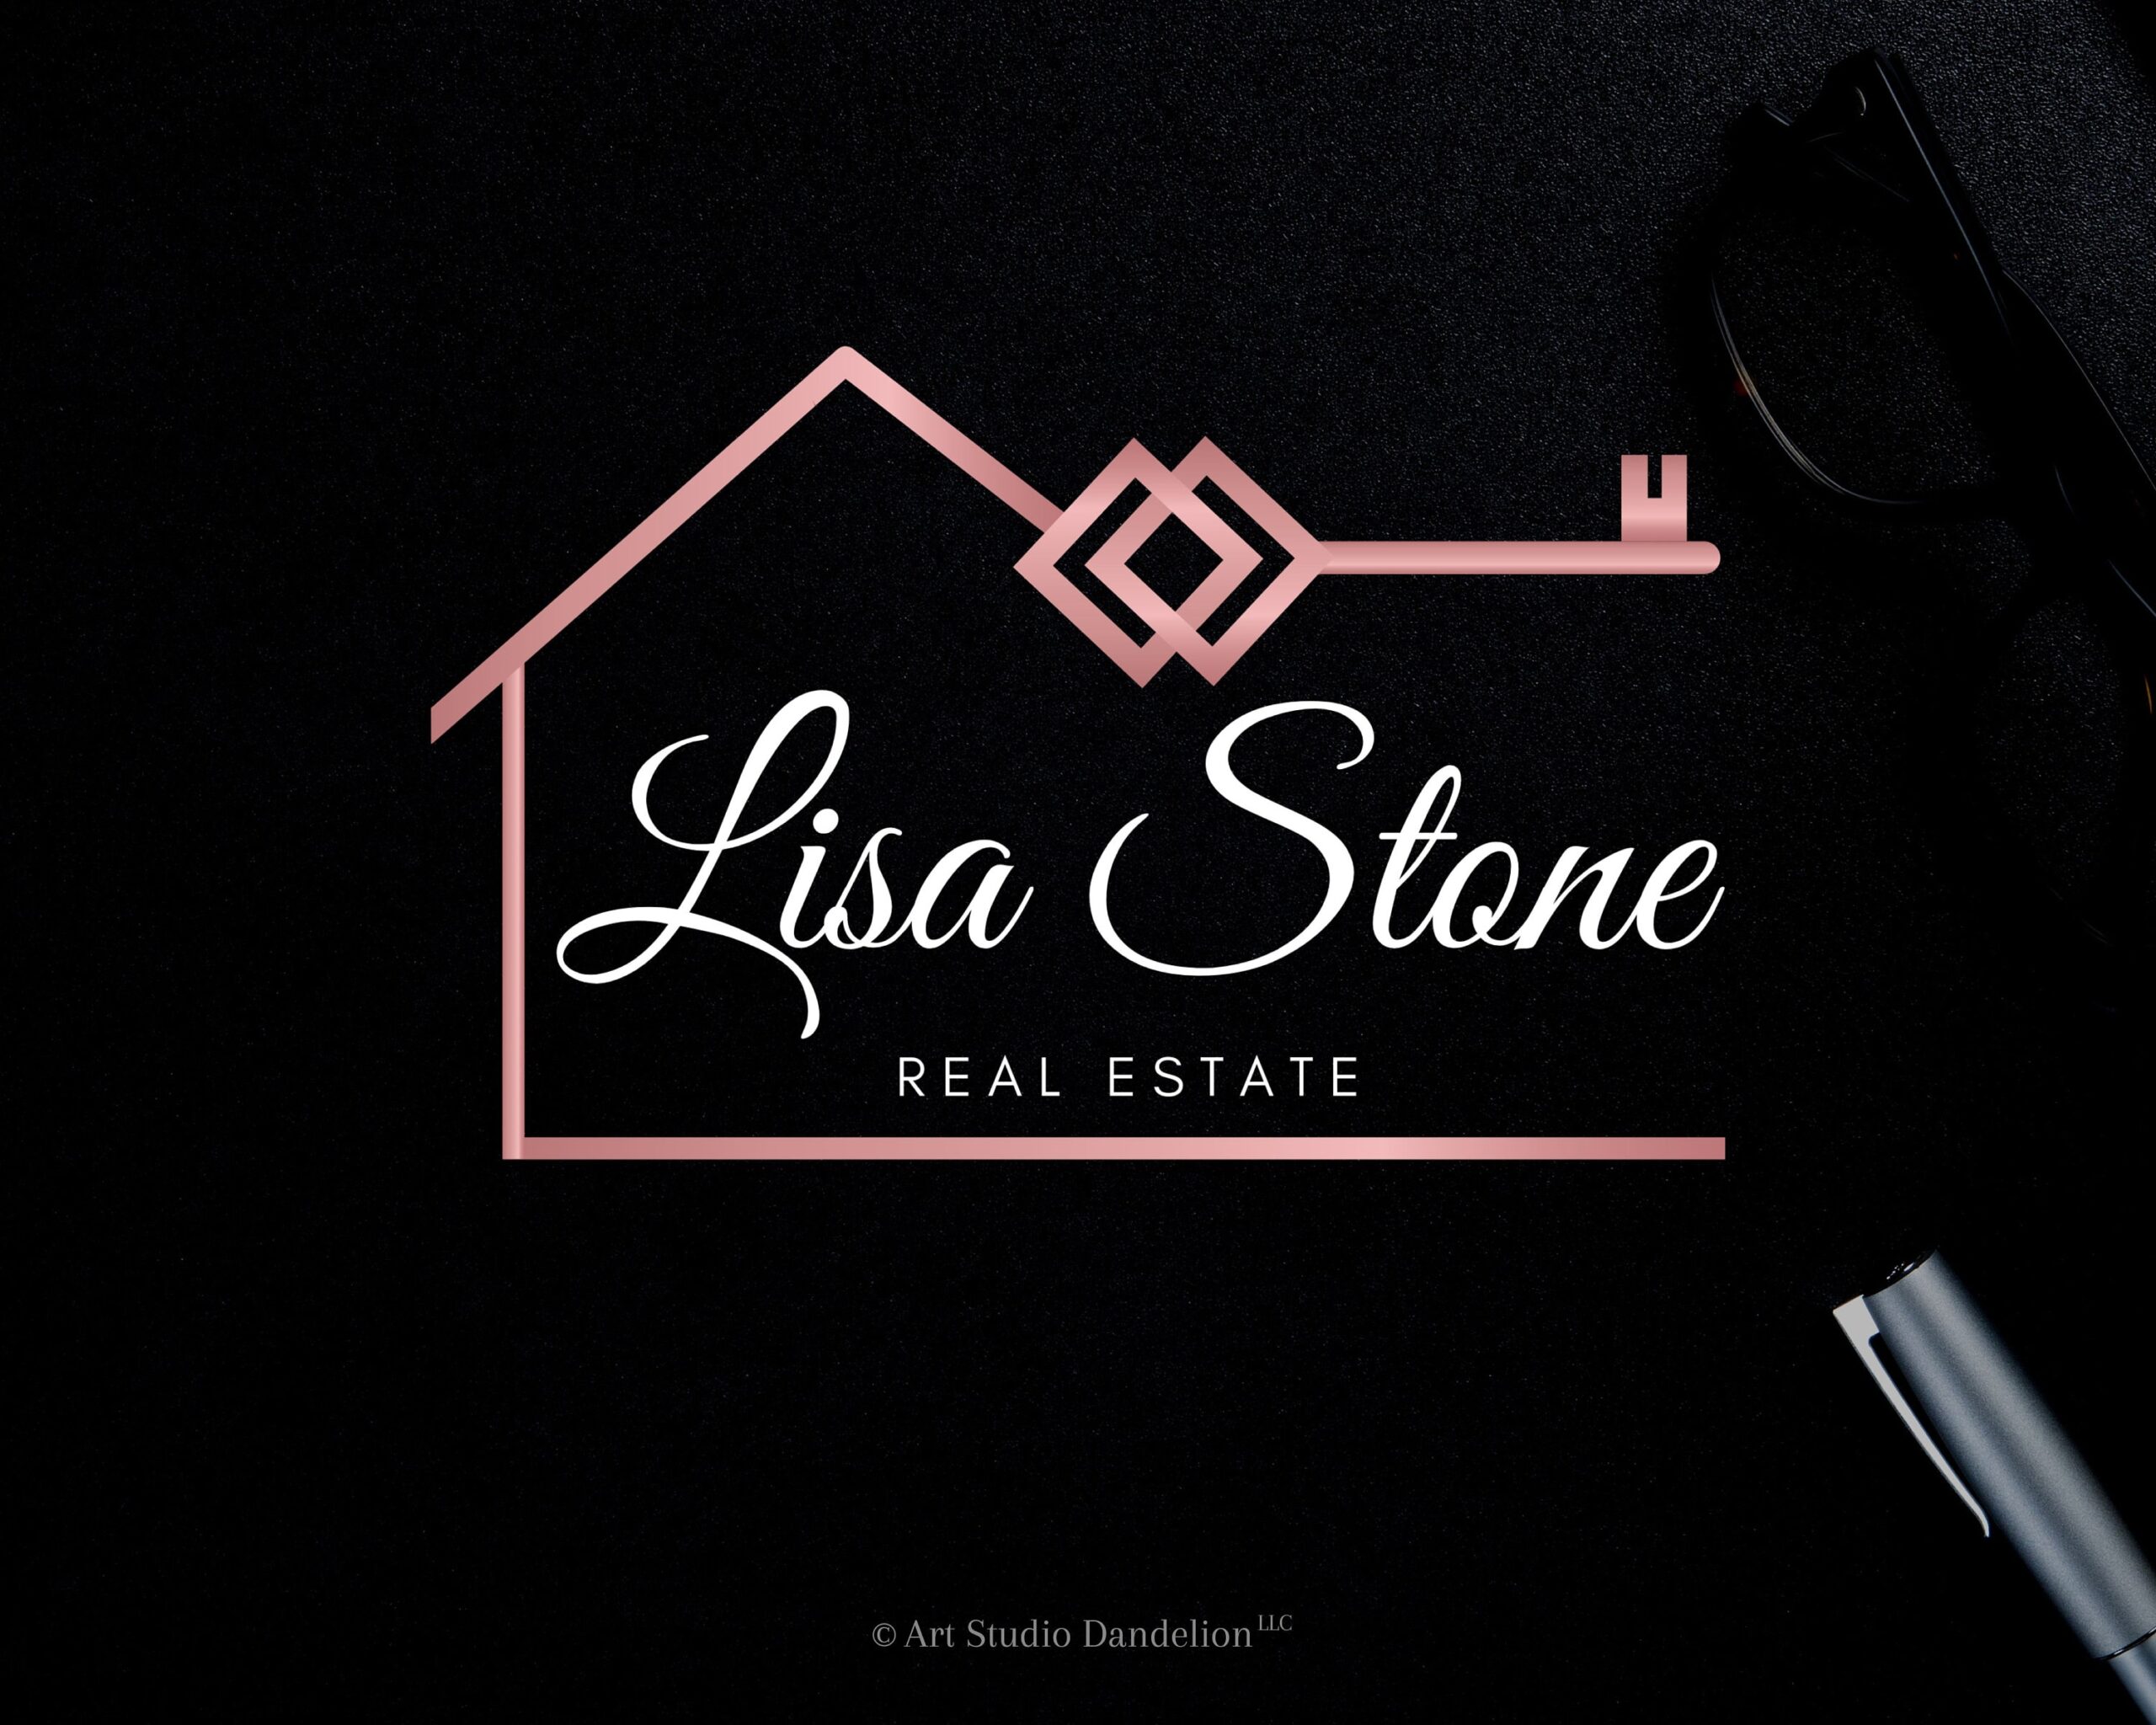 PREMADE LOGO DESIGN, Real Estate Logo, Broker Logo, Rose Gold Logo for Agents. I will edit, review, and delivery all files in High-Quality.